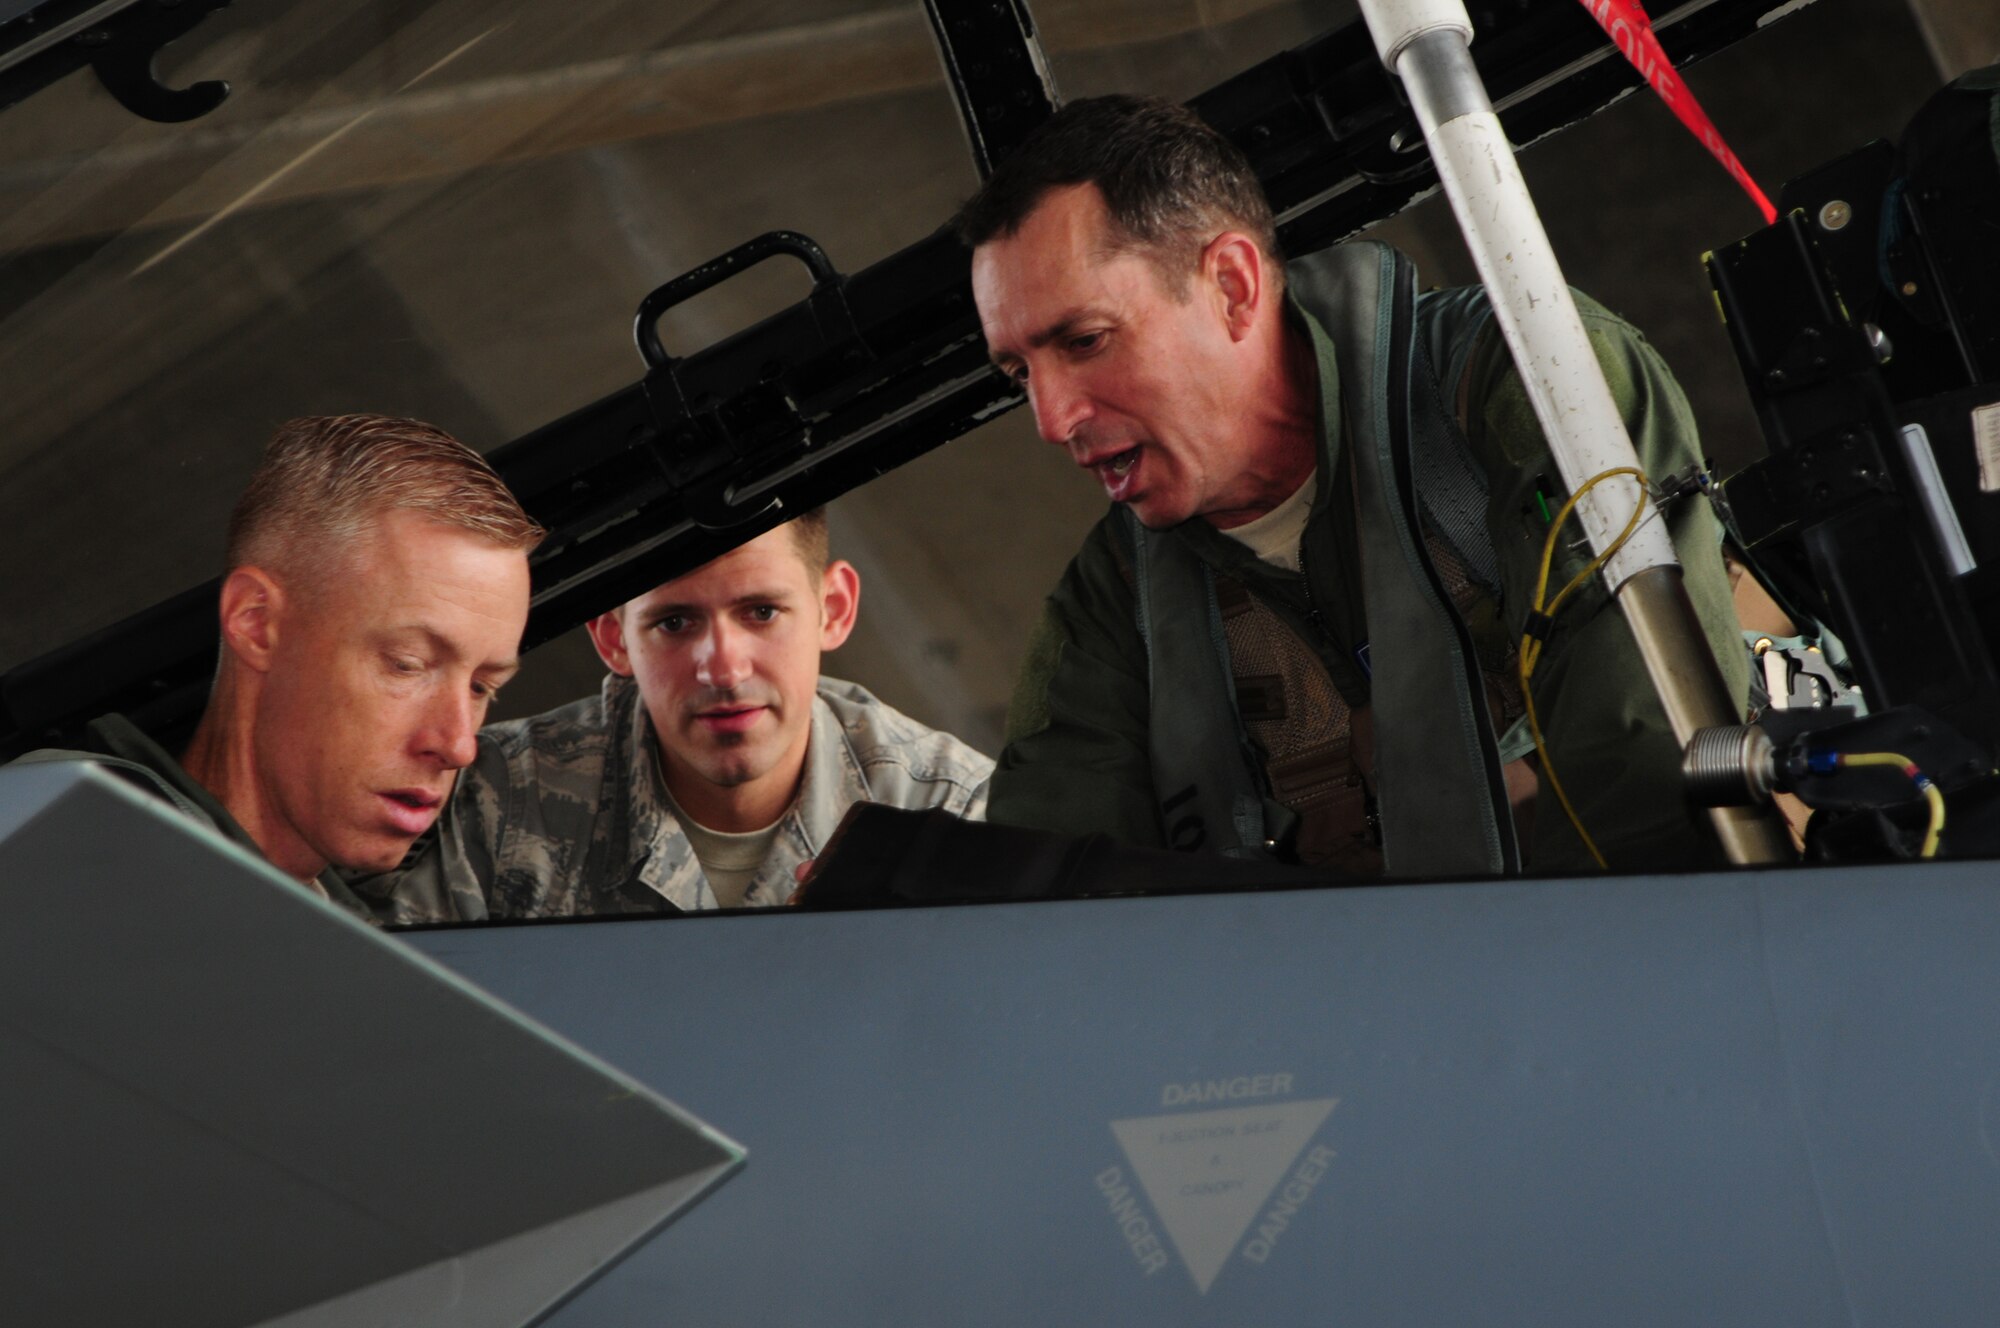 18th Wing Commander Brig. Gen. Brett Williams assists Command Chief Master Sgt. Michael Warner before his F-15 familiarization flight as Senior Airman Stanley Weaver, a Crew Chief from the 18th Aircraft Maintenance Squadron, ensures everything is properly secured, May 27. (U.S. Air Force photo/Staff Sgt. Lakisha Croley)